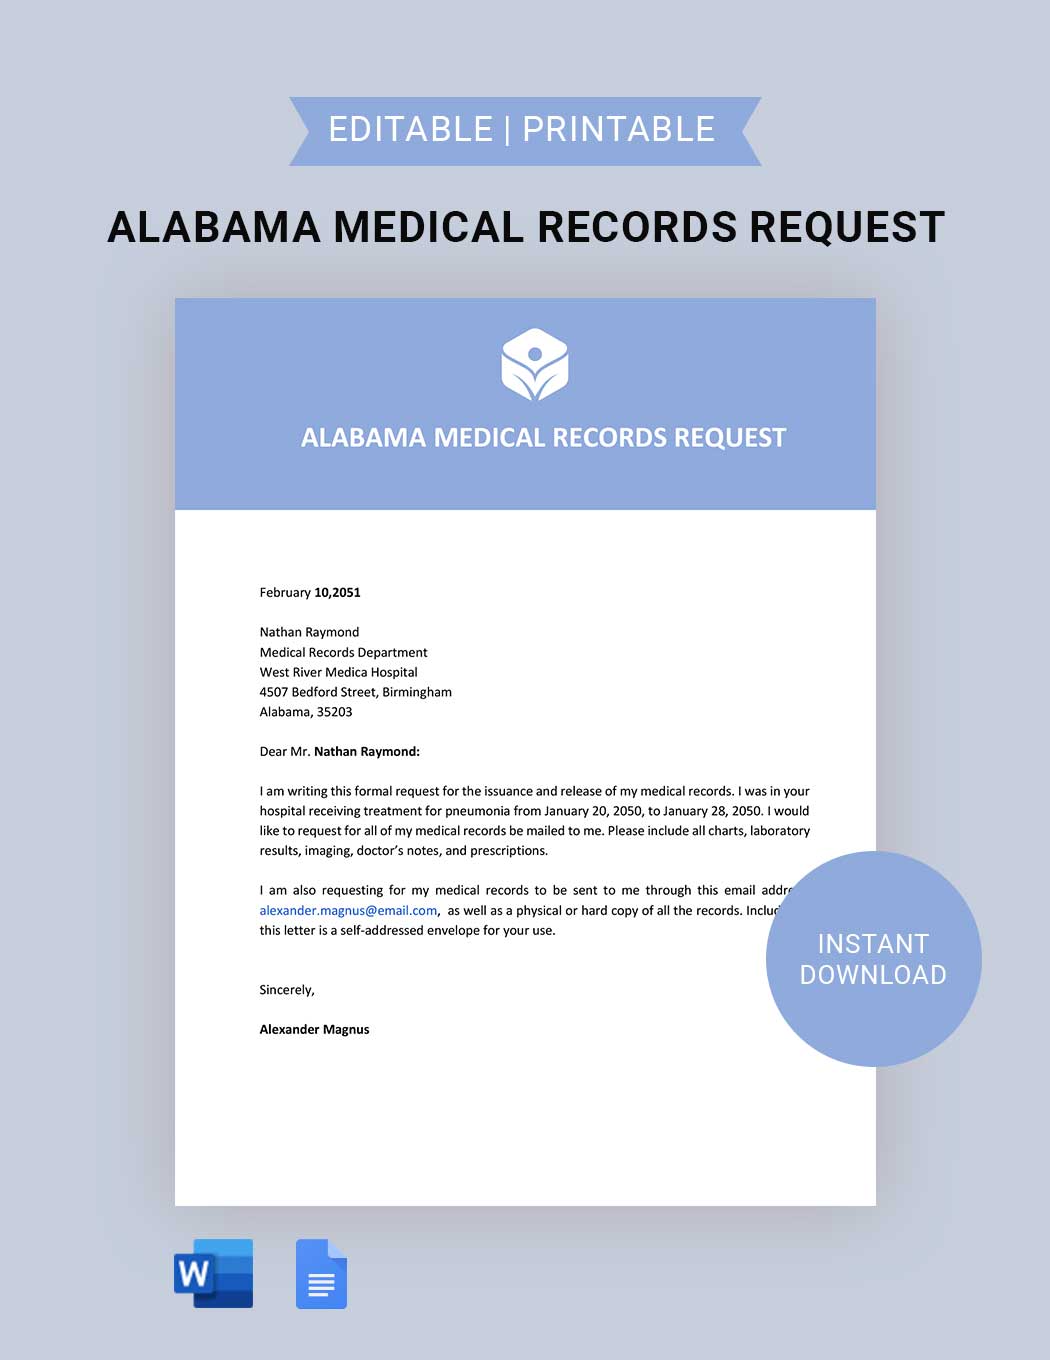 Alabama Medical Records Request Template in Word, Google Docs